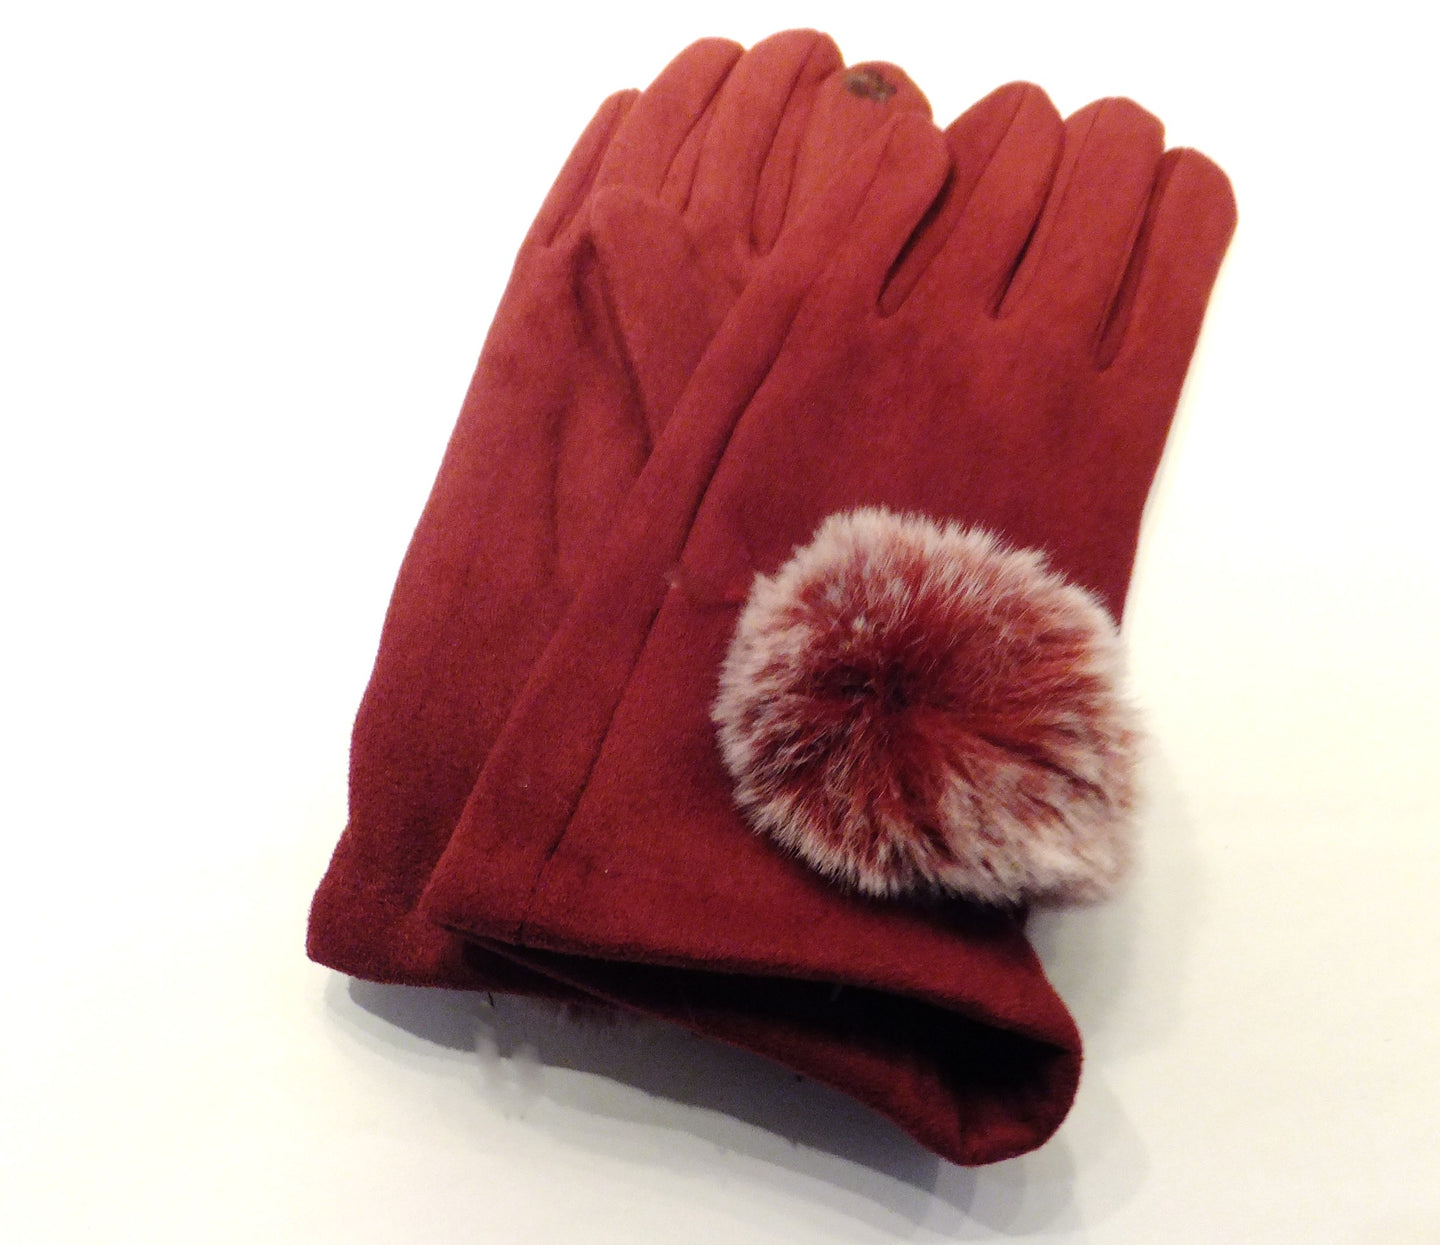 Red suede glove with fur trim